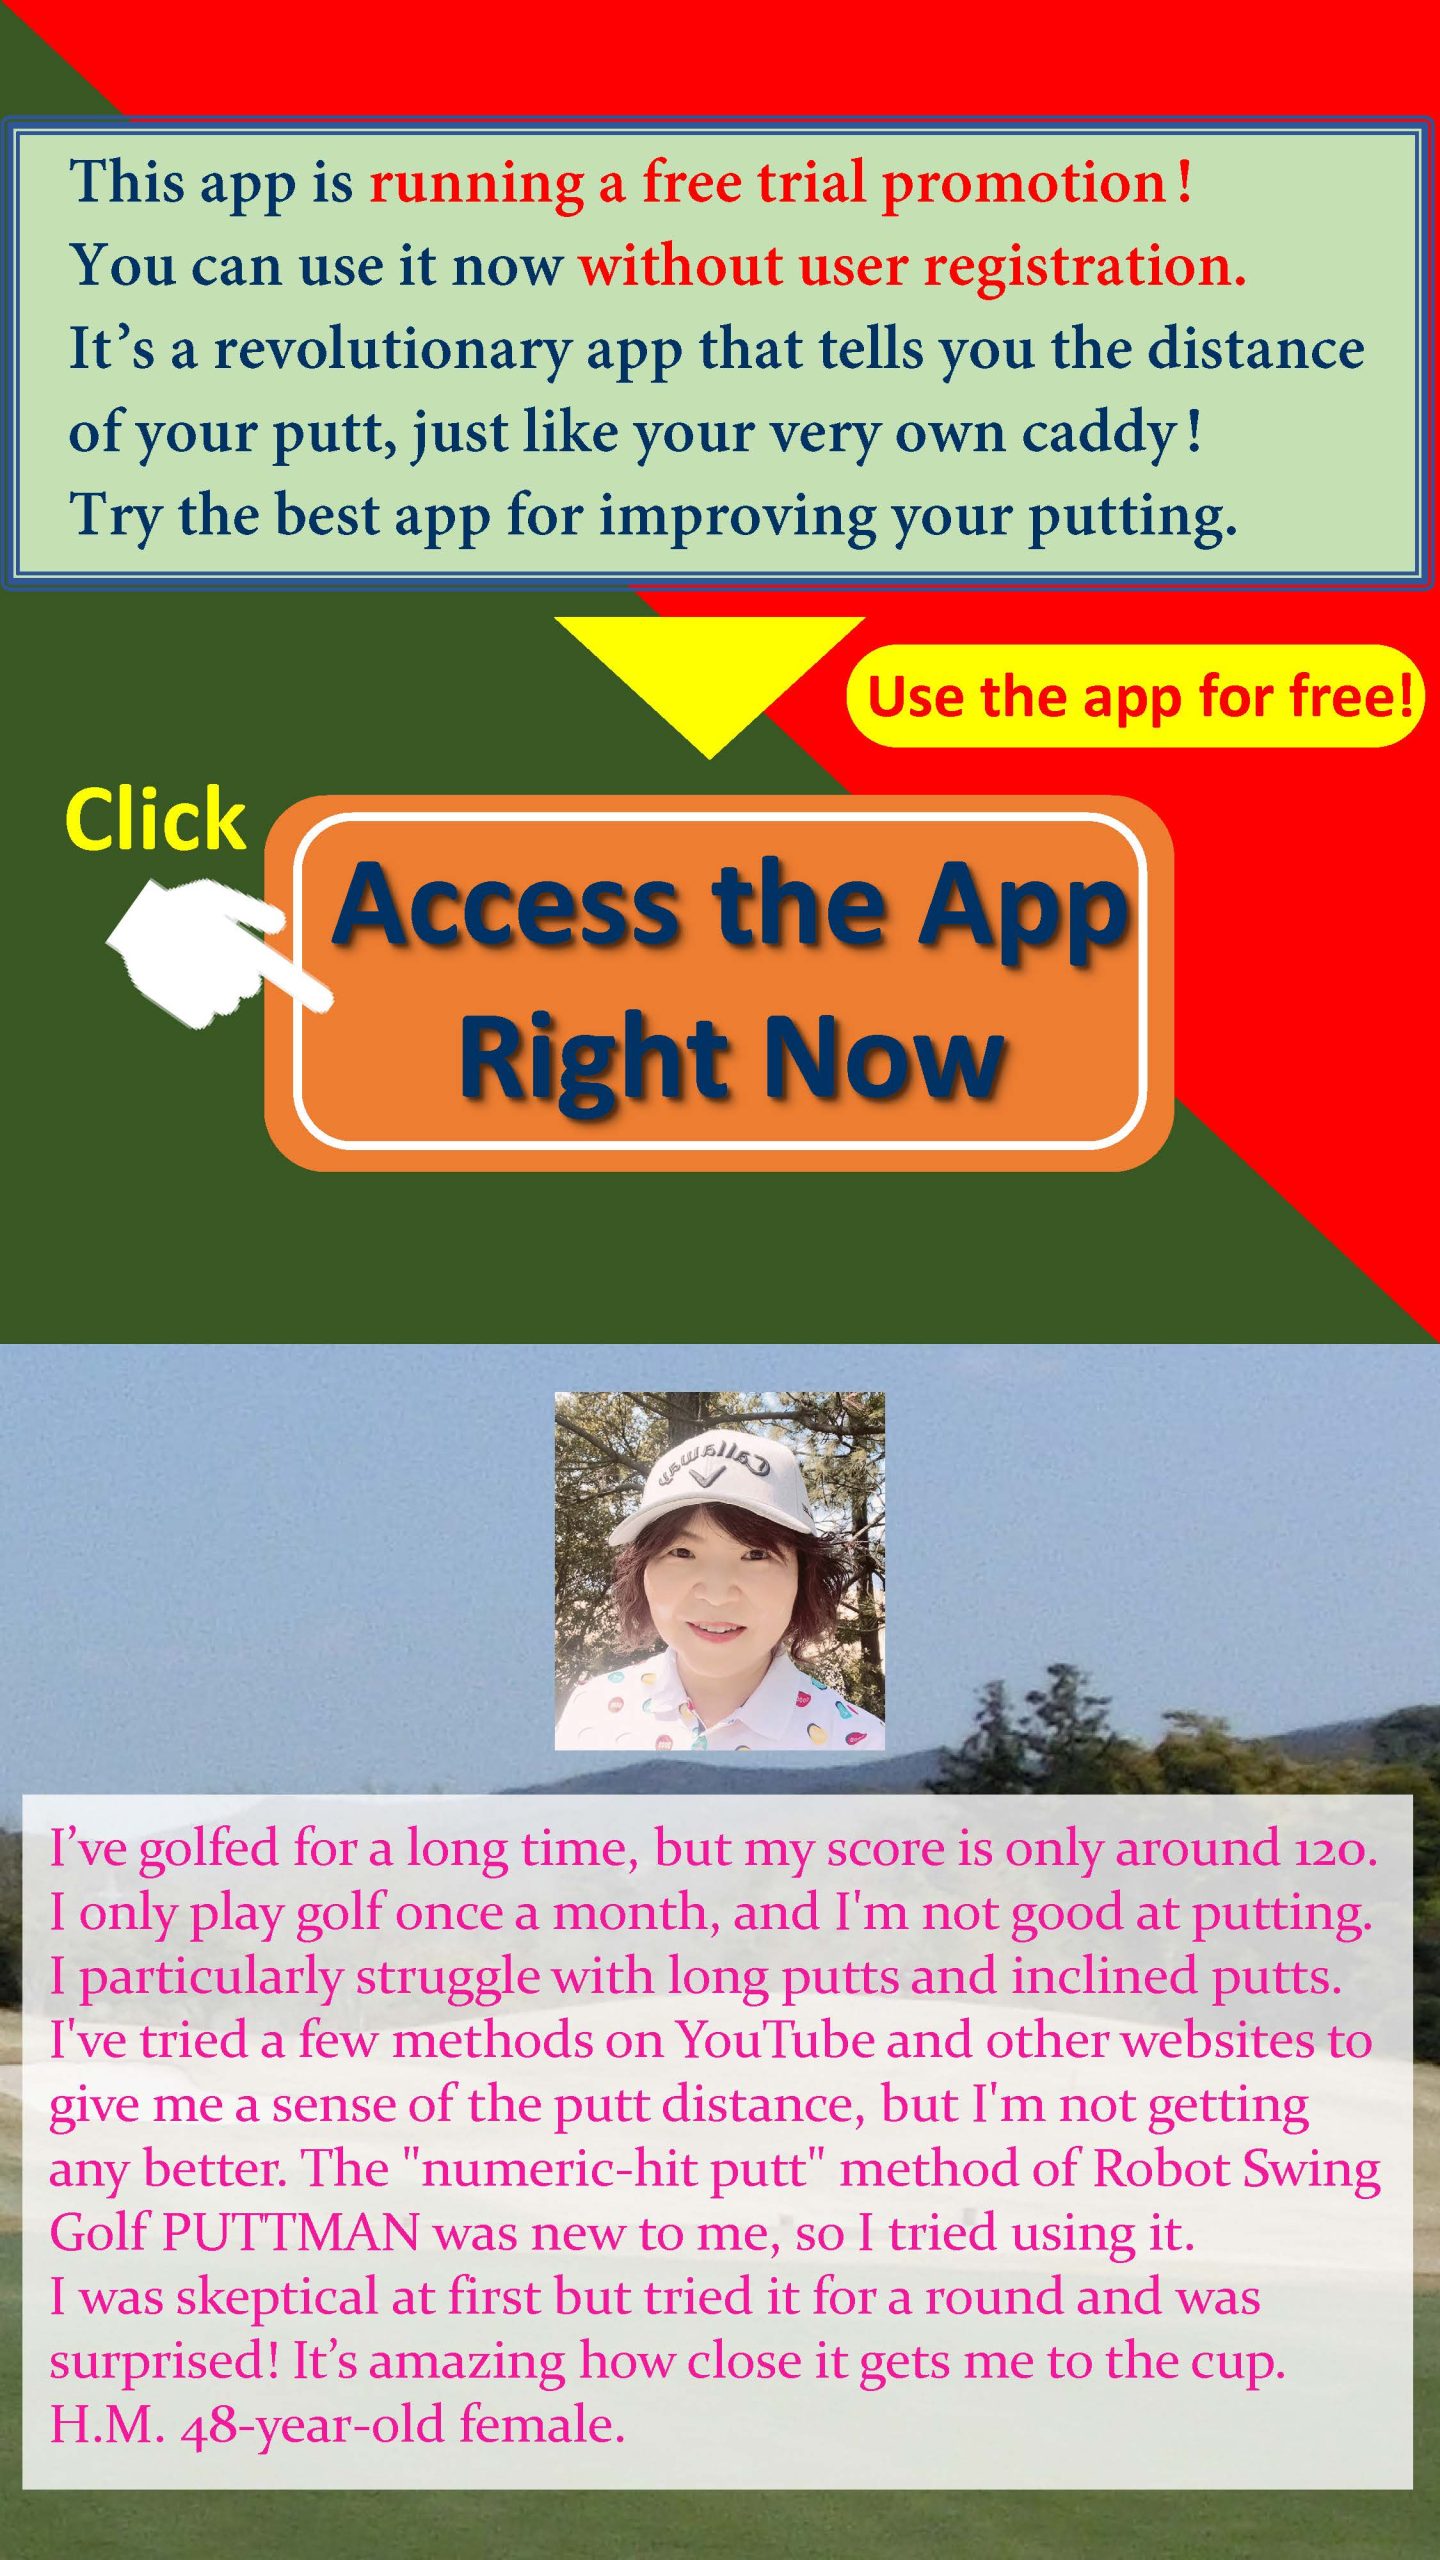 This app is running a free trial promotion! You can use it now without user registration. It’s a revolutionary app that tells you the distance of your putt, just like your very own caddy! Try the best app for improving your putting. I’ve golfed for a long time, but my score is only around 120. I only play golf once a month, and I'm not good at putting. I particularly struggle with long putts and inclined putts. I've tried a few methods on YouTube and other websites to give me a sense of the putt distance, but I'm not getting any better. The 